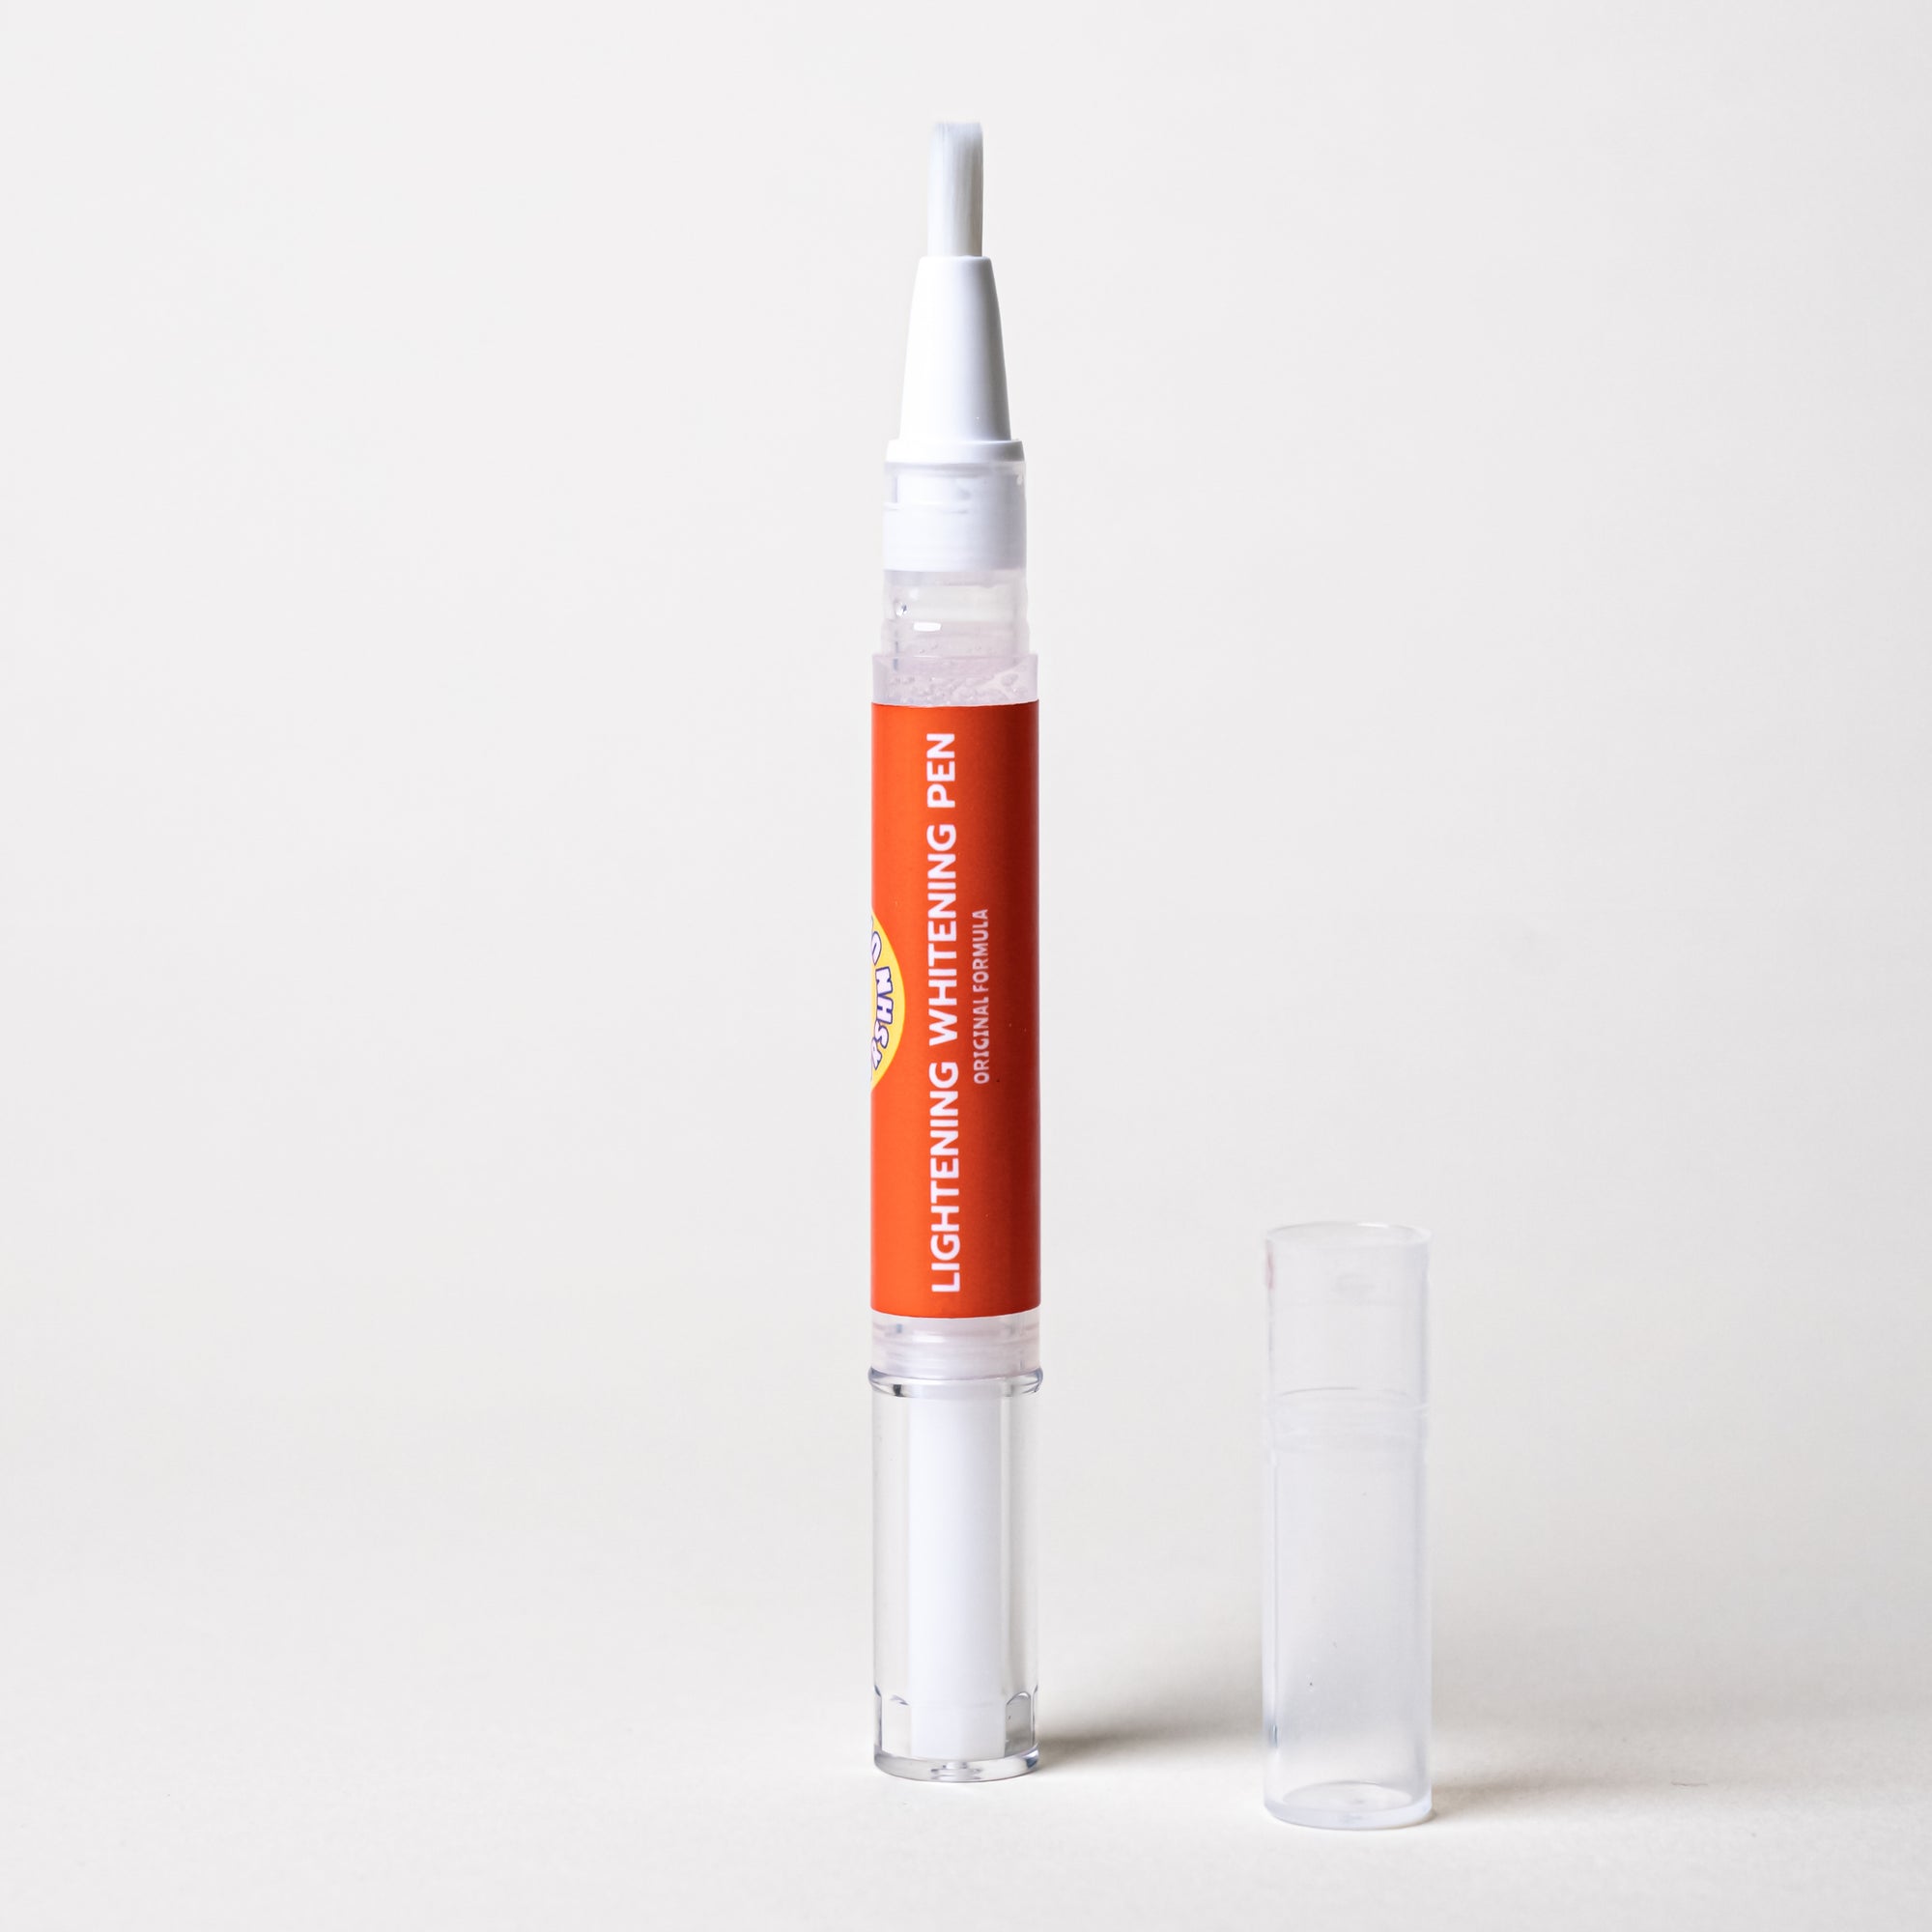 A fast-acting FRSHN UP Lightening Whitening Pen - Original Formula - 2-pack with an orange tube and a white tube next to it.